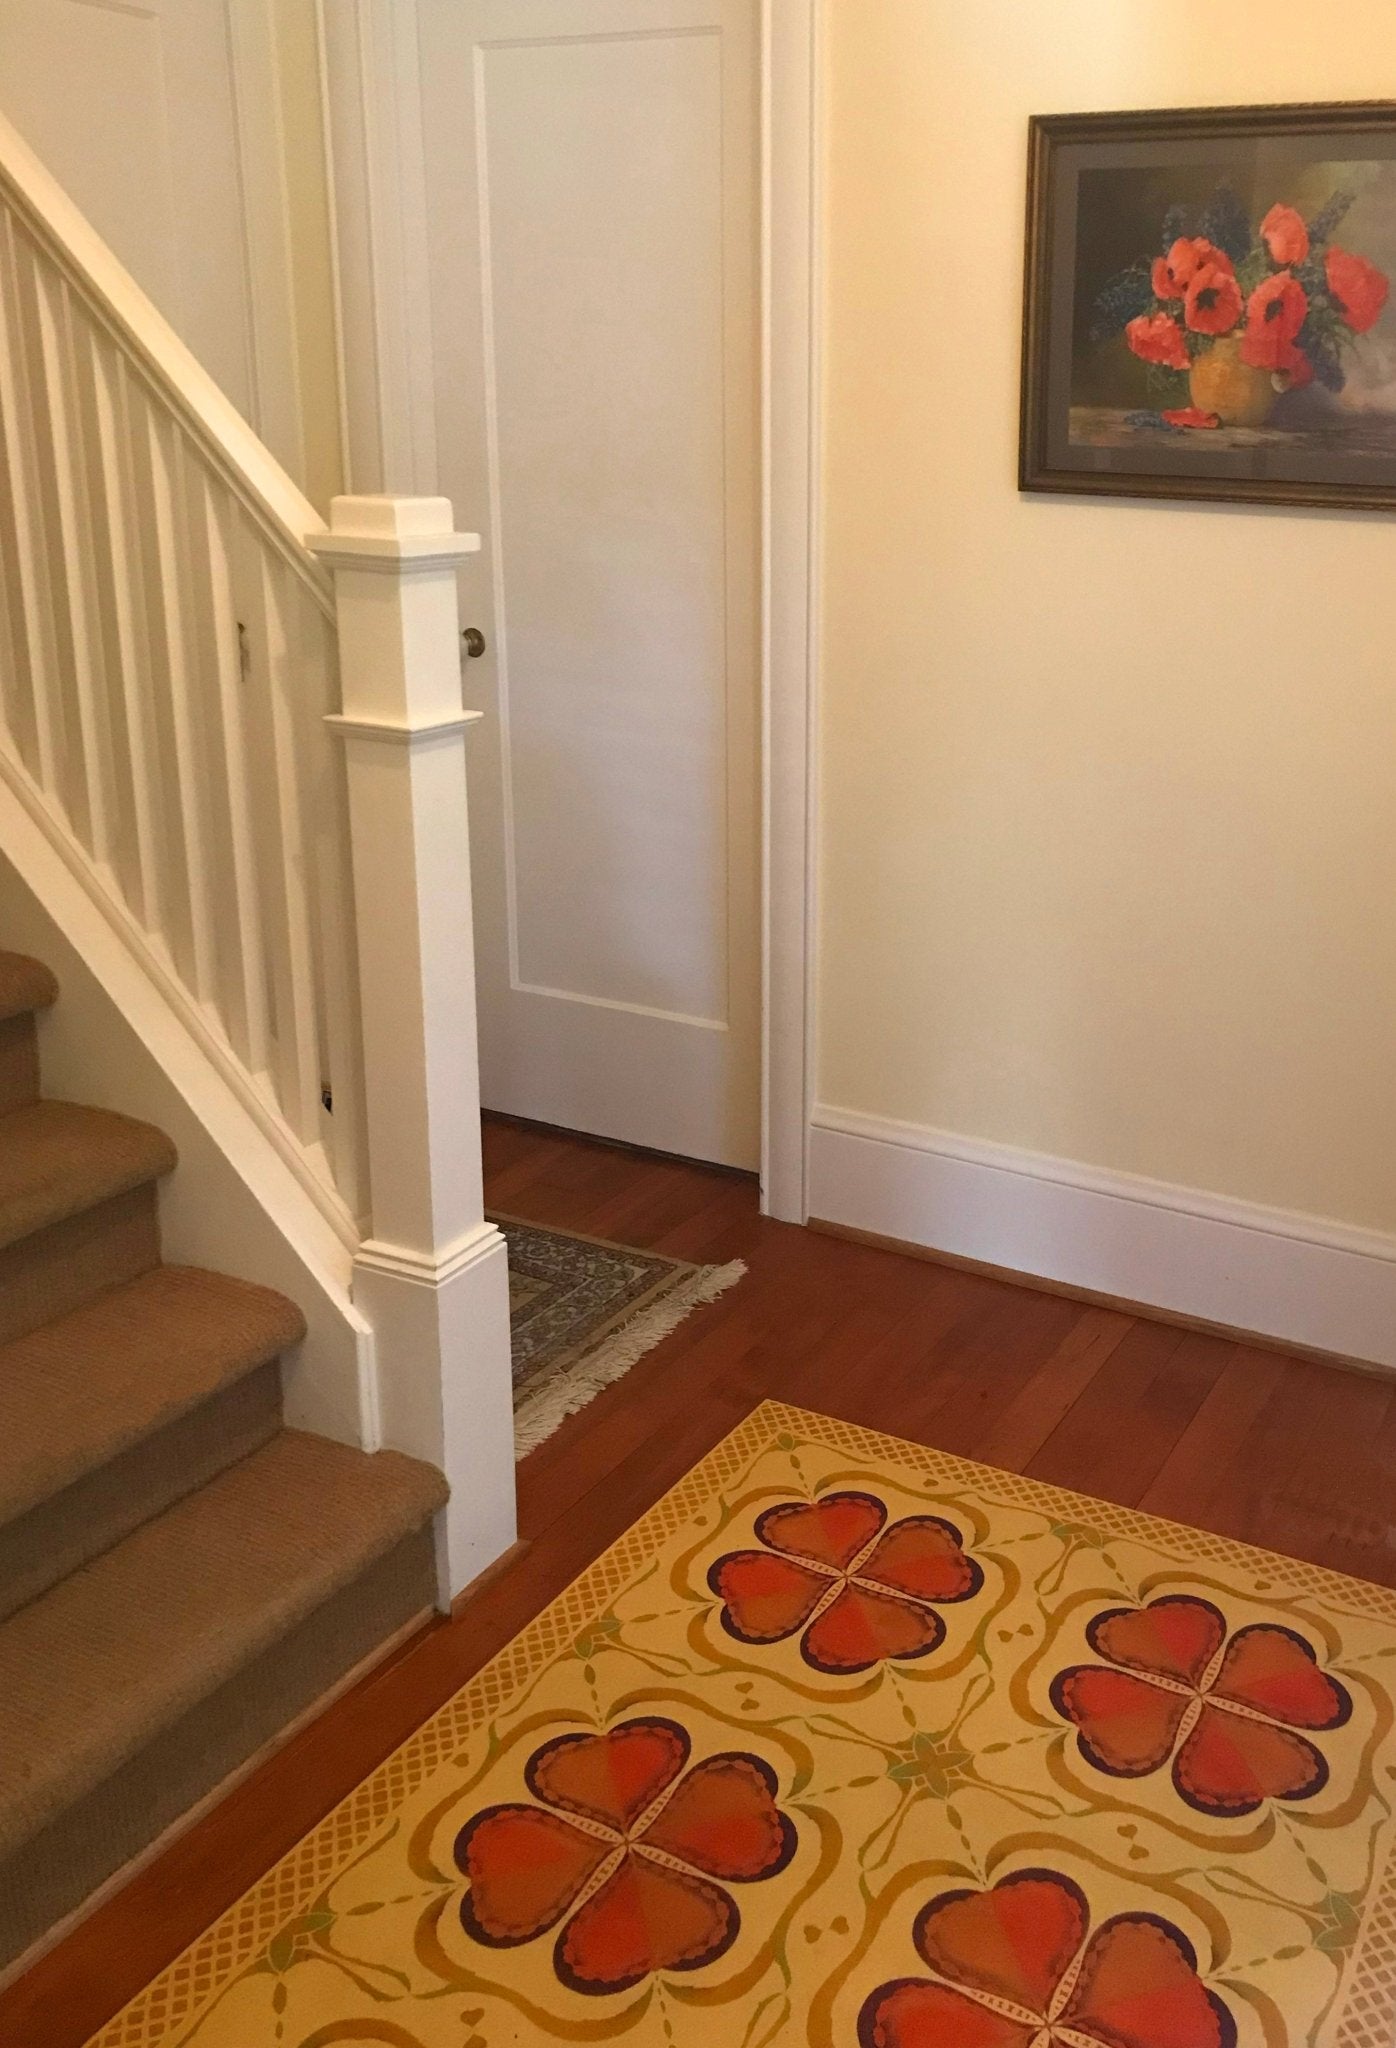 An in-situ image of Honeymoon Floorcloth #1.  The palette was inspired by the Poppy painting on the wall along with other artwork in this hallway.